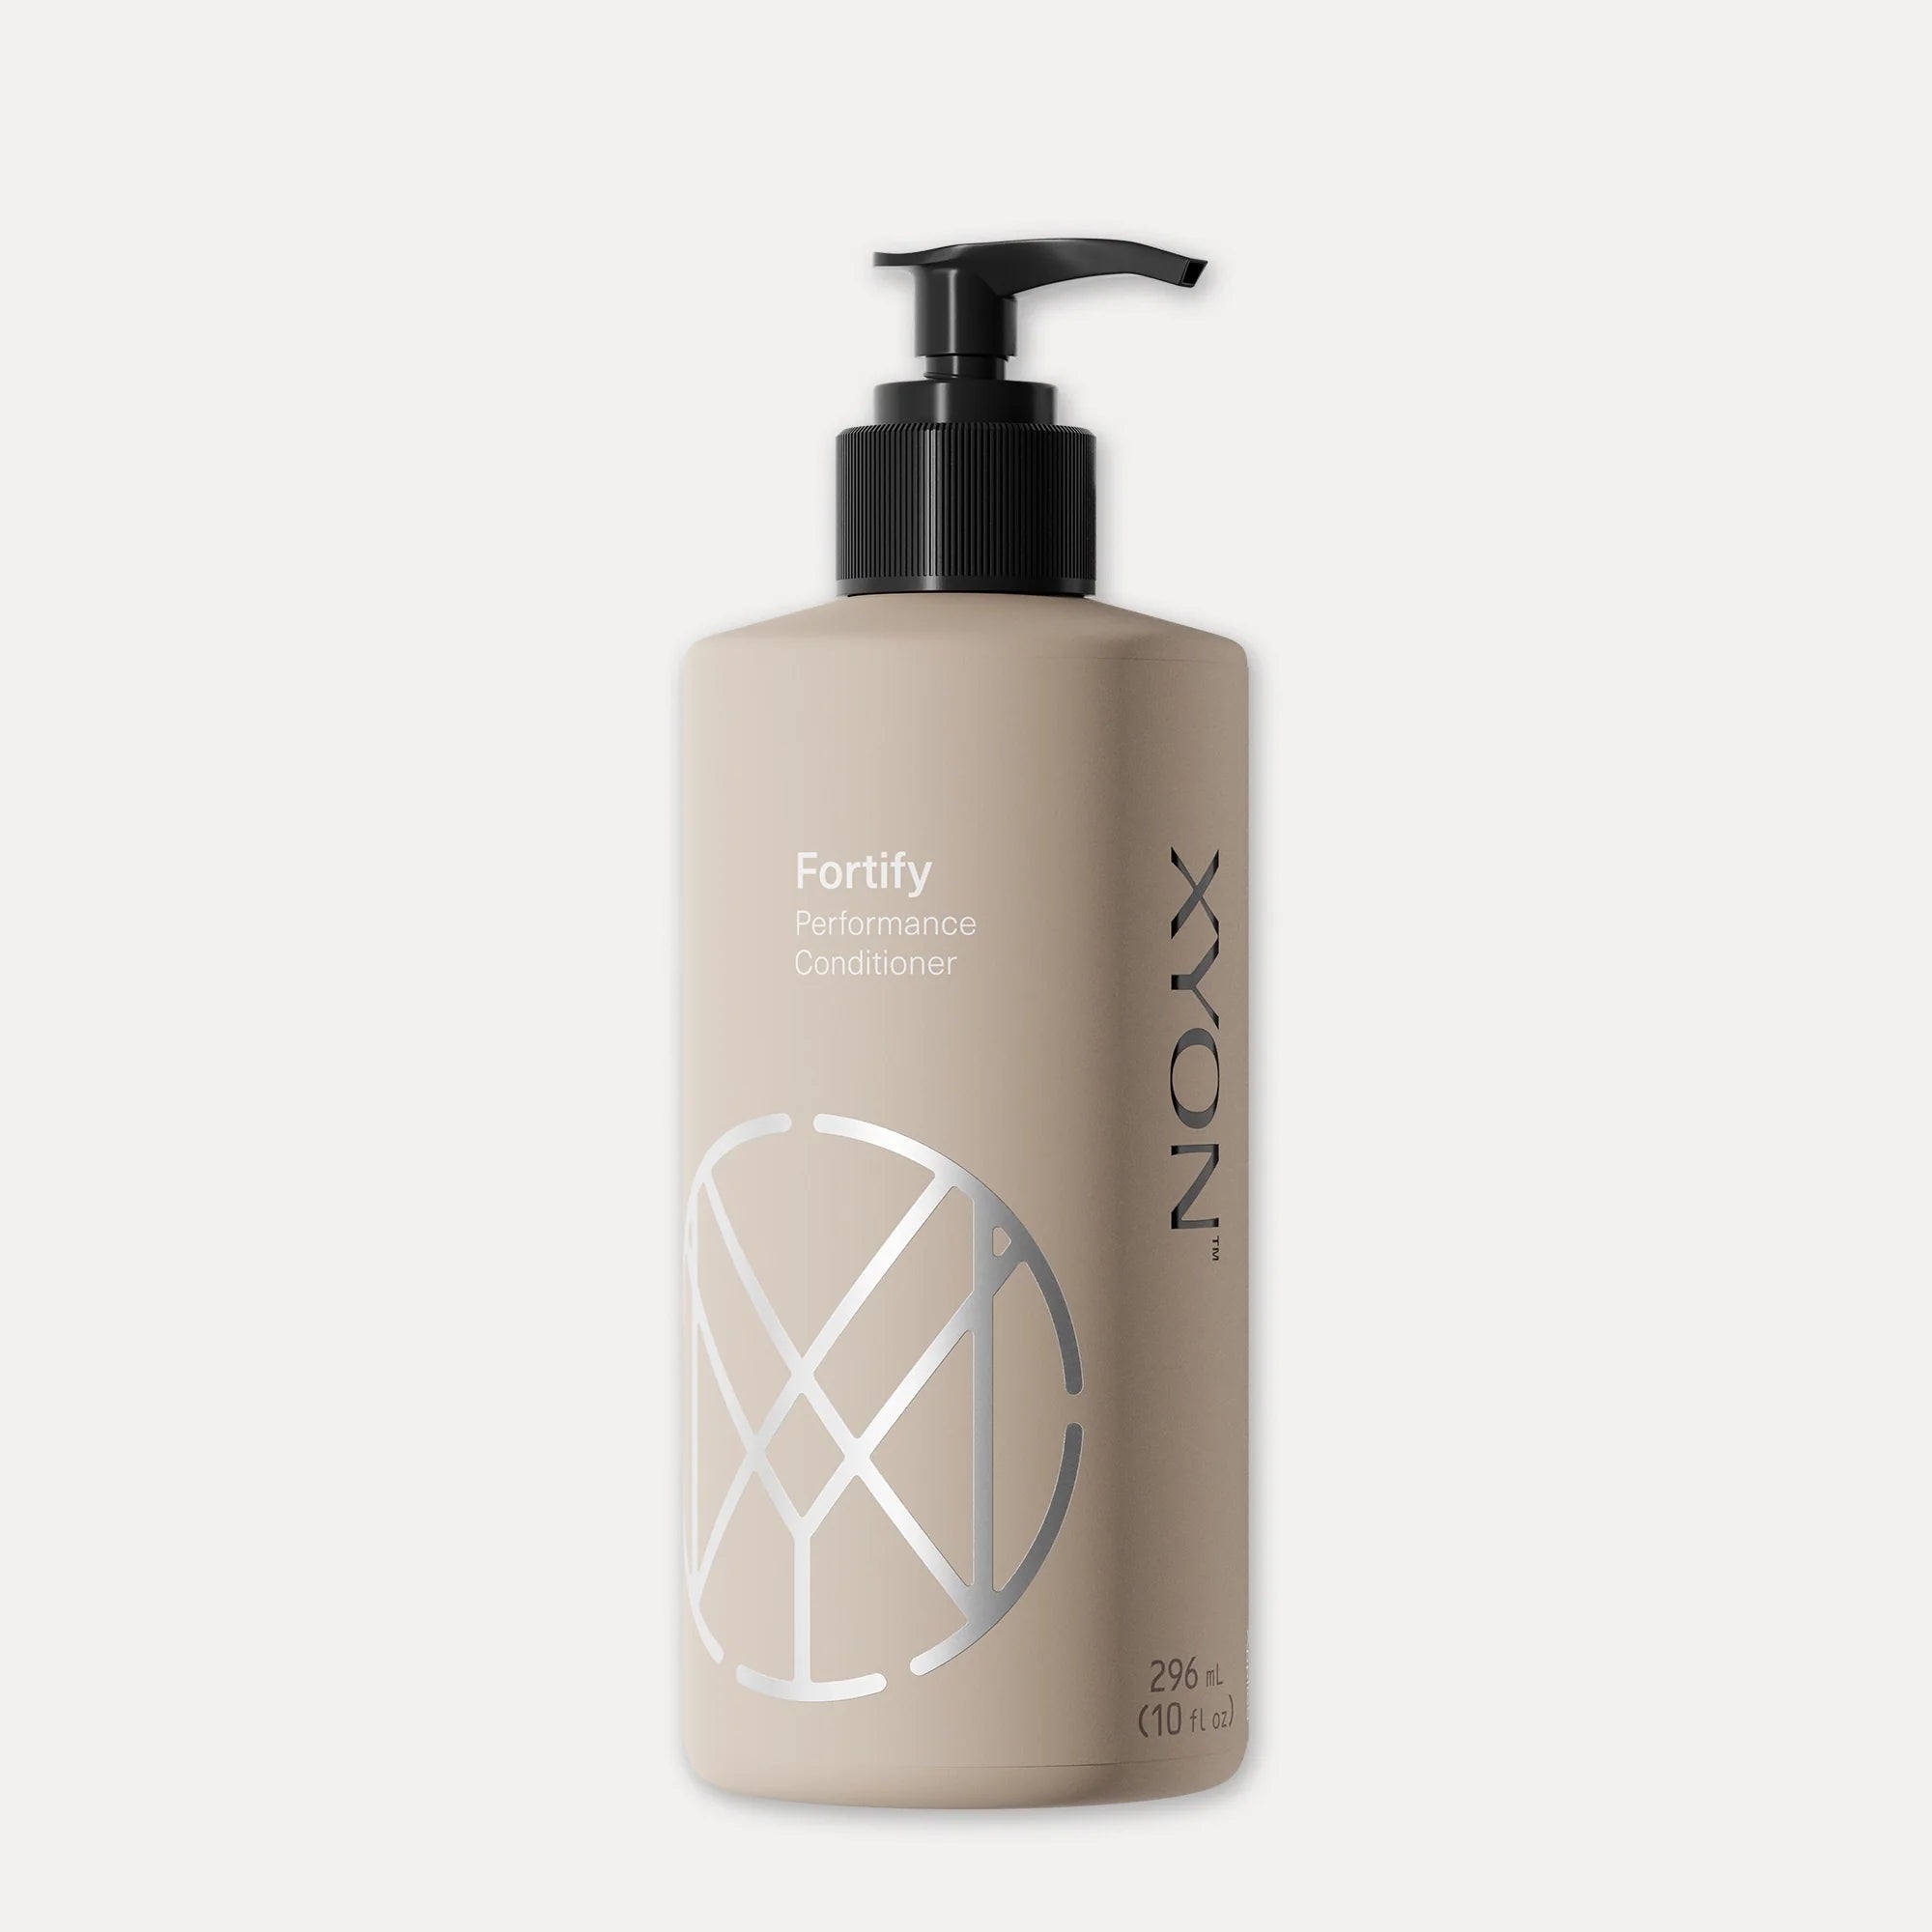 Fortify Performance Conditioner